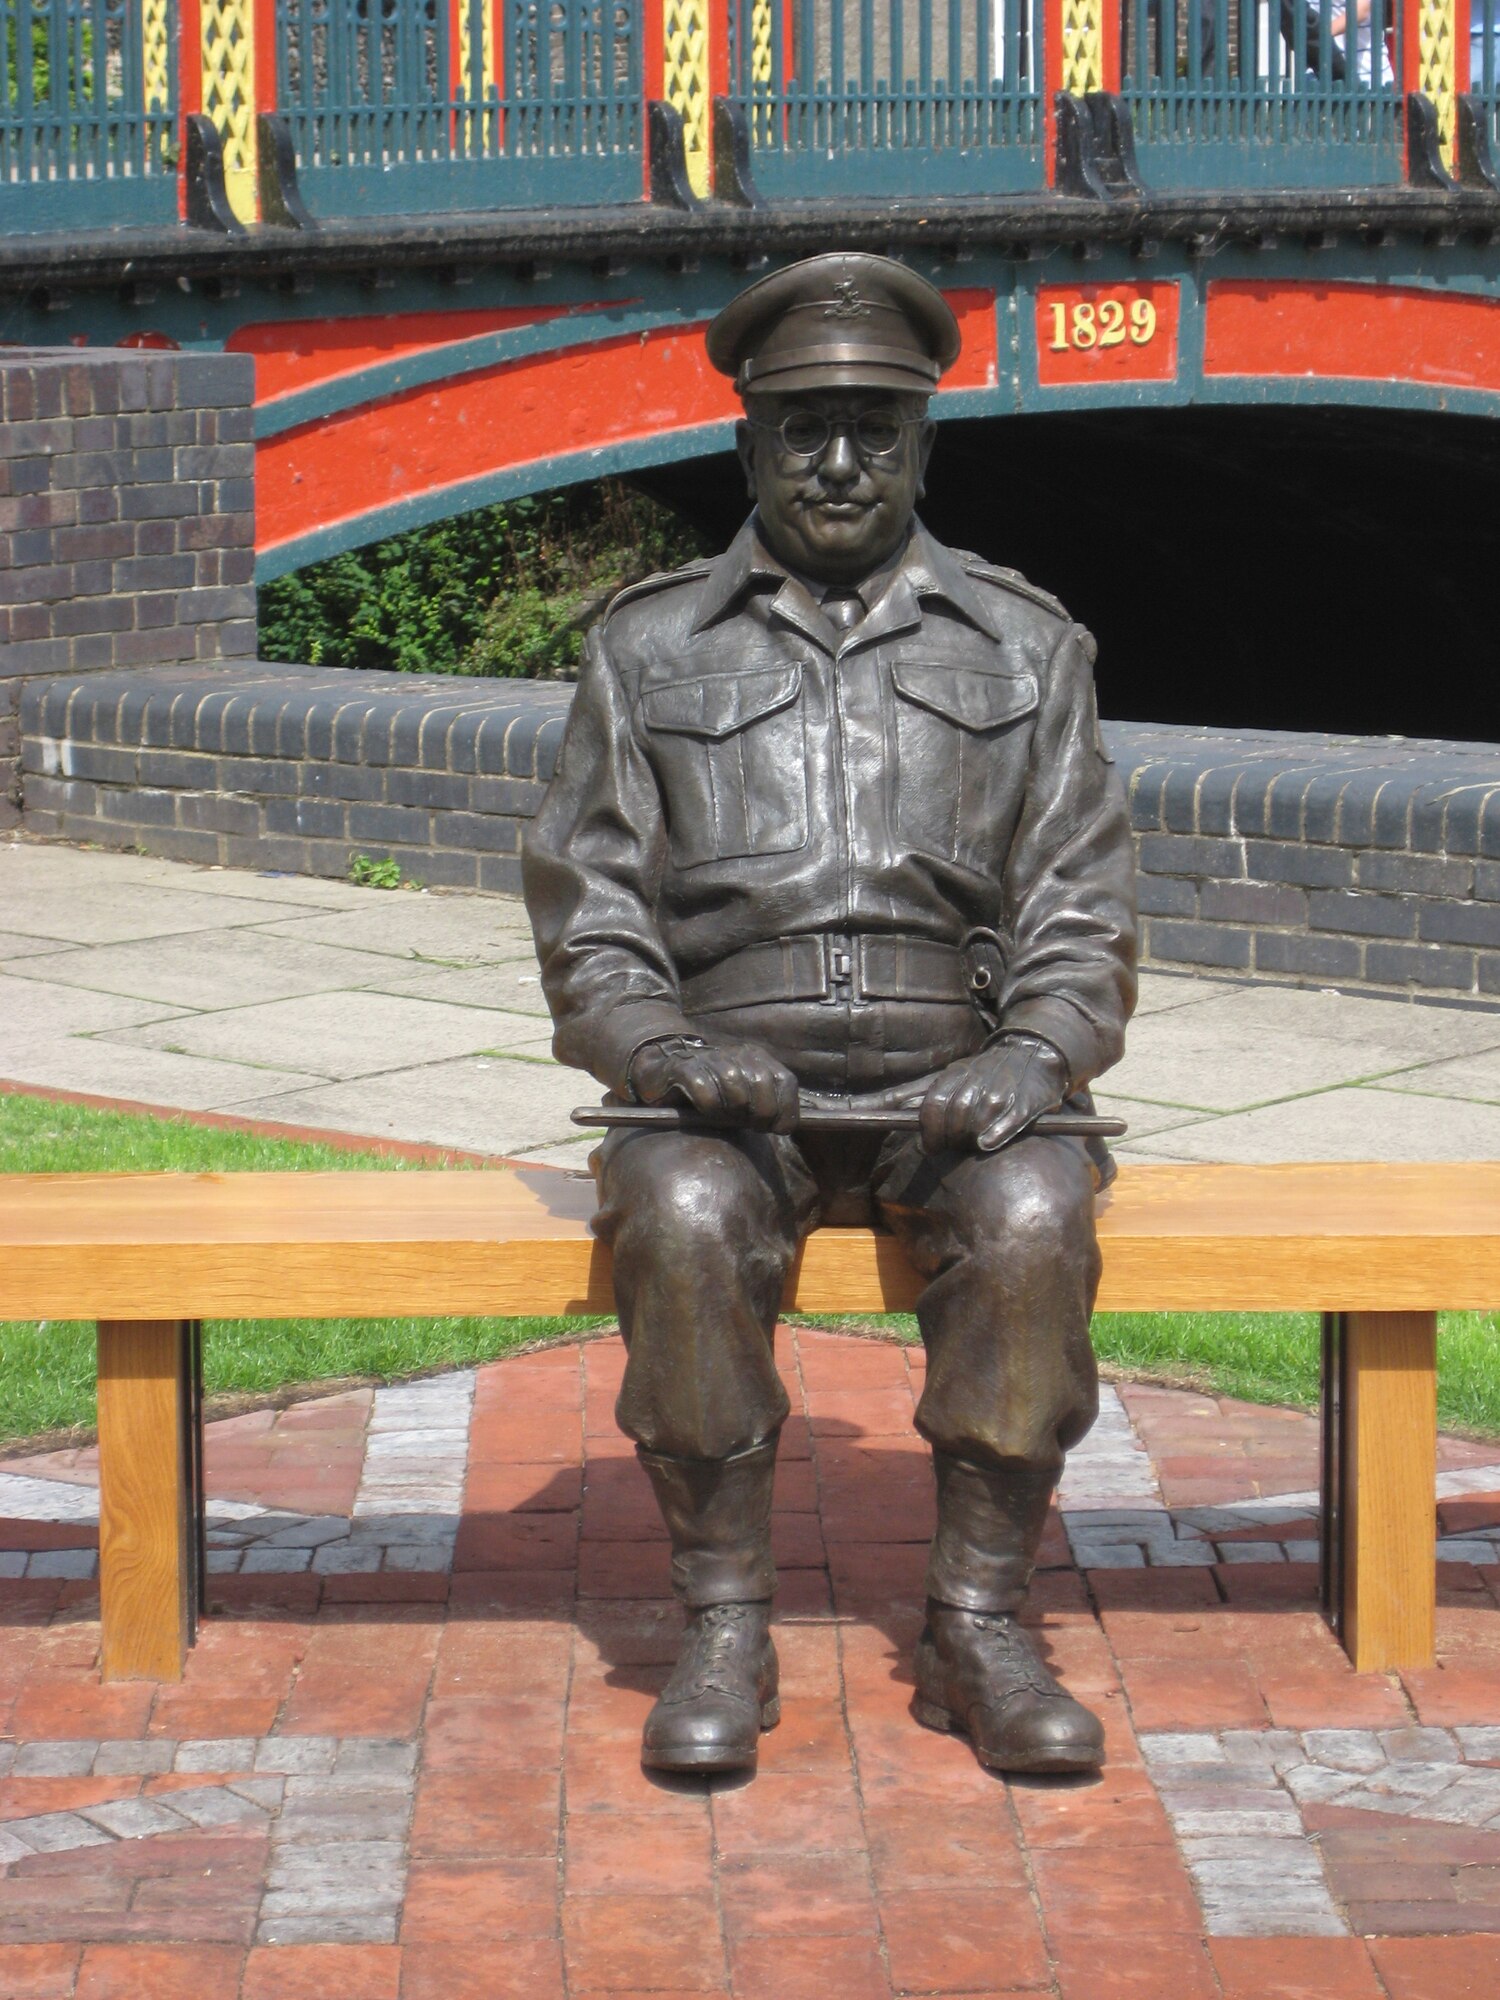 This bronze statue of Capt Mainwaring is situated close to the bridge which crosses the River Little Ouse in the centre of Thetford, Norfolk. Captain Mainwaring was the commander of the fictional World War II Home Guard unit featured in the British sitcom, "Dad's Army". Much of the series was filmed in East Anglia.The statue shows Mainwaring wearing his Home Guard uniform, seated on bench, with his baton across his knees. (U.S. Air Force photo by Suzanne Harper)